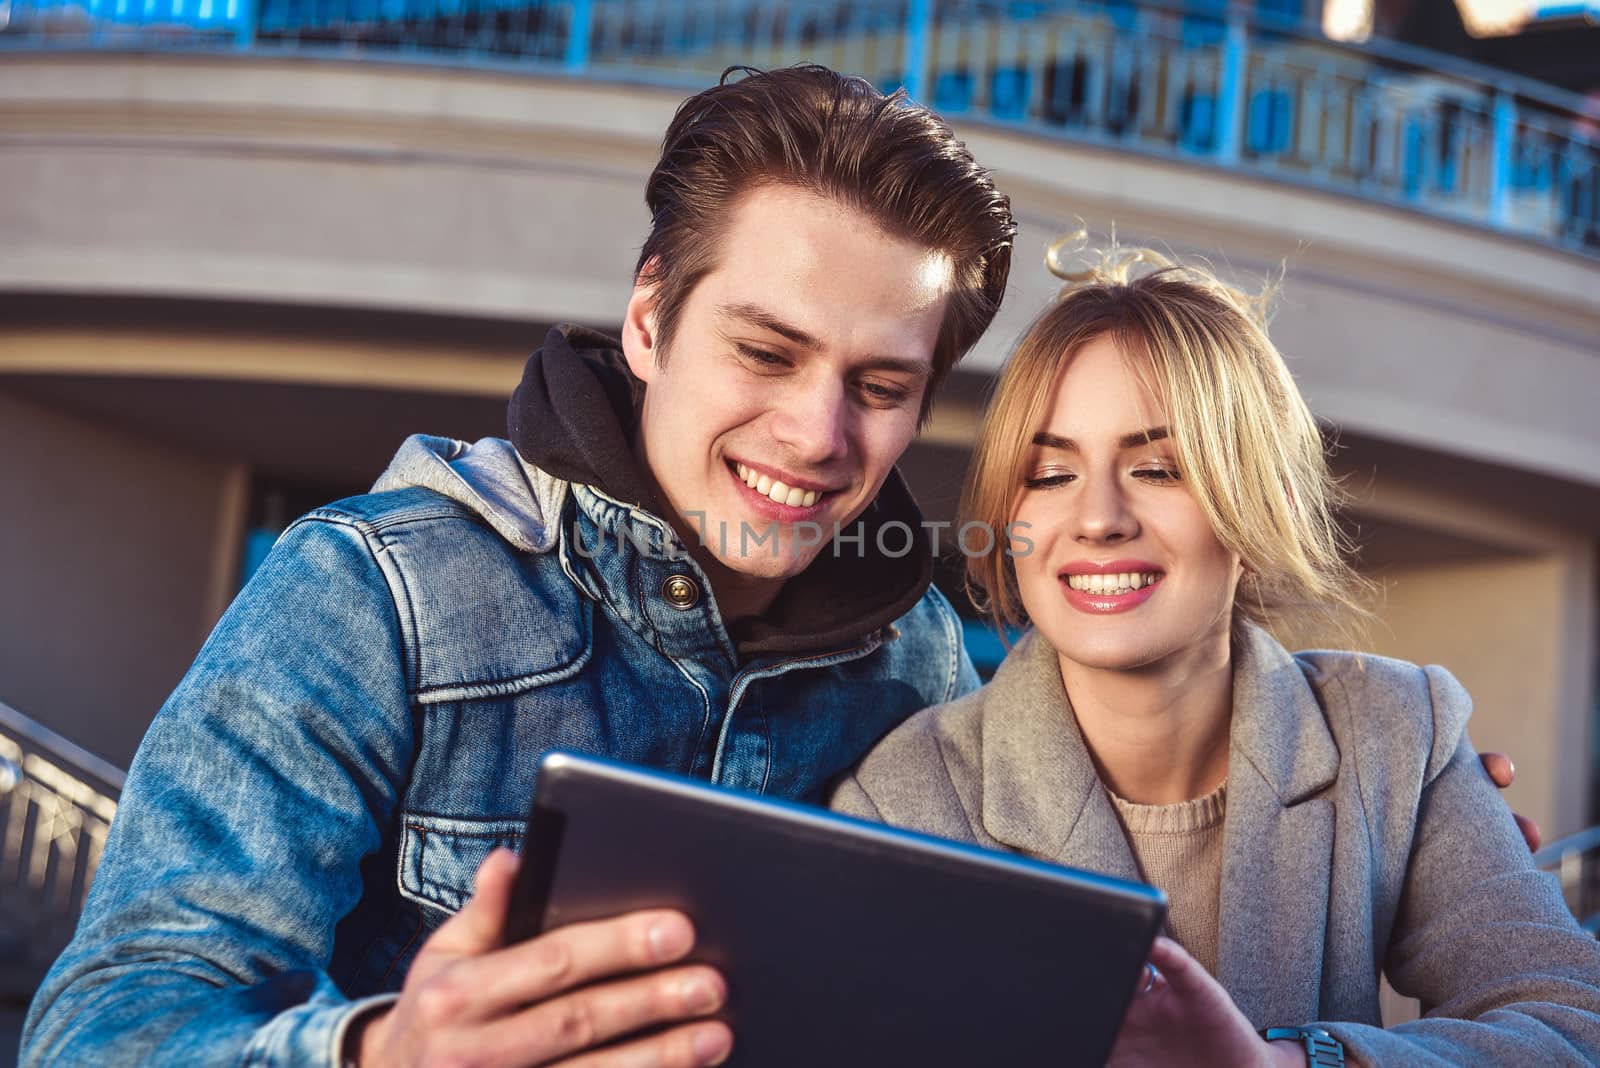 Attractive young couple sitting on floor in urban street reading information on a tablet with a smile